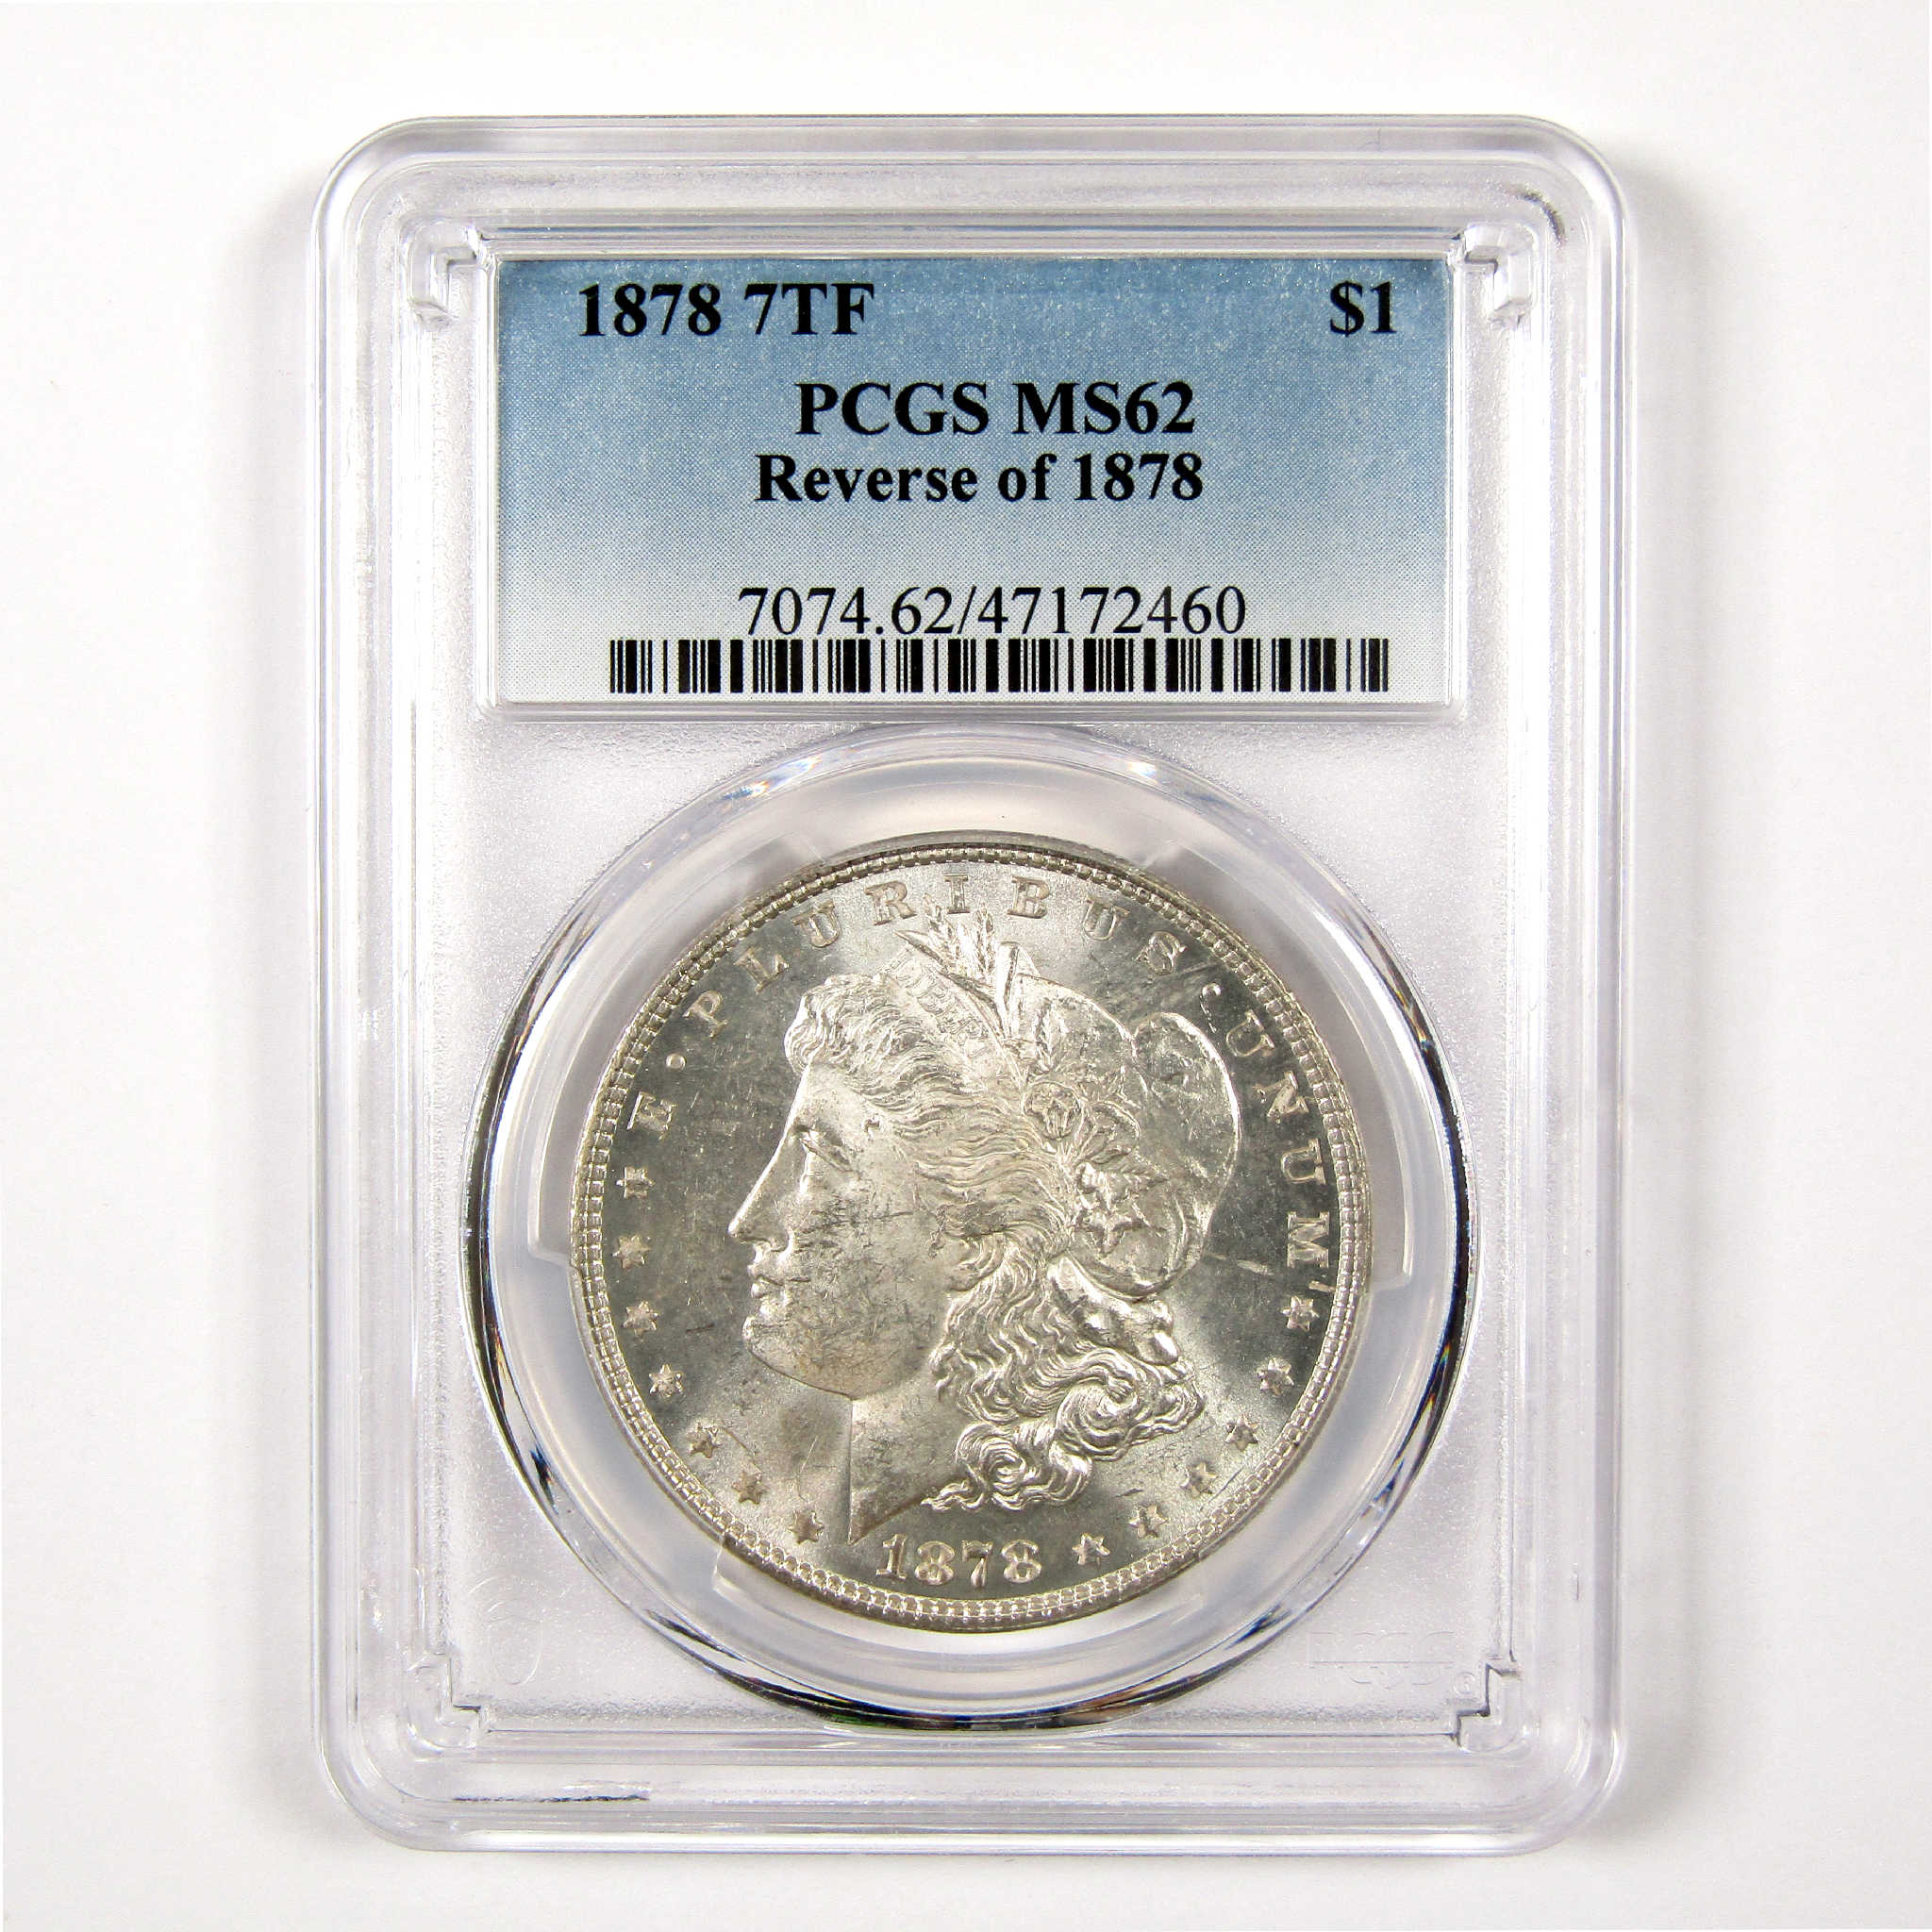 1878 7TF Rev 78 Morgan Dollar MS 62 PCGS Silver $1 Unc SKU:I11325 - Morgan coin - Morgan silver dollar - Morgan silver dollar for sale - Profile Coins &amp; Collectibles